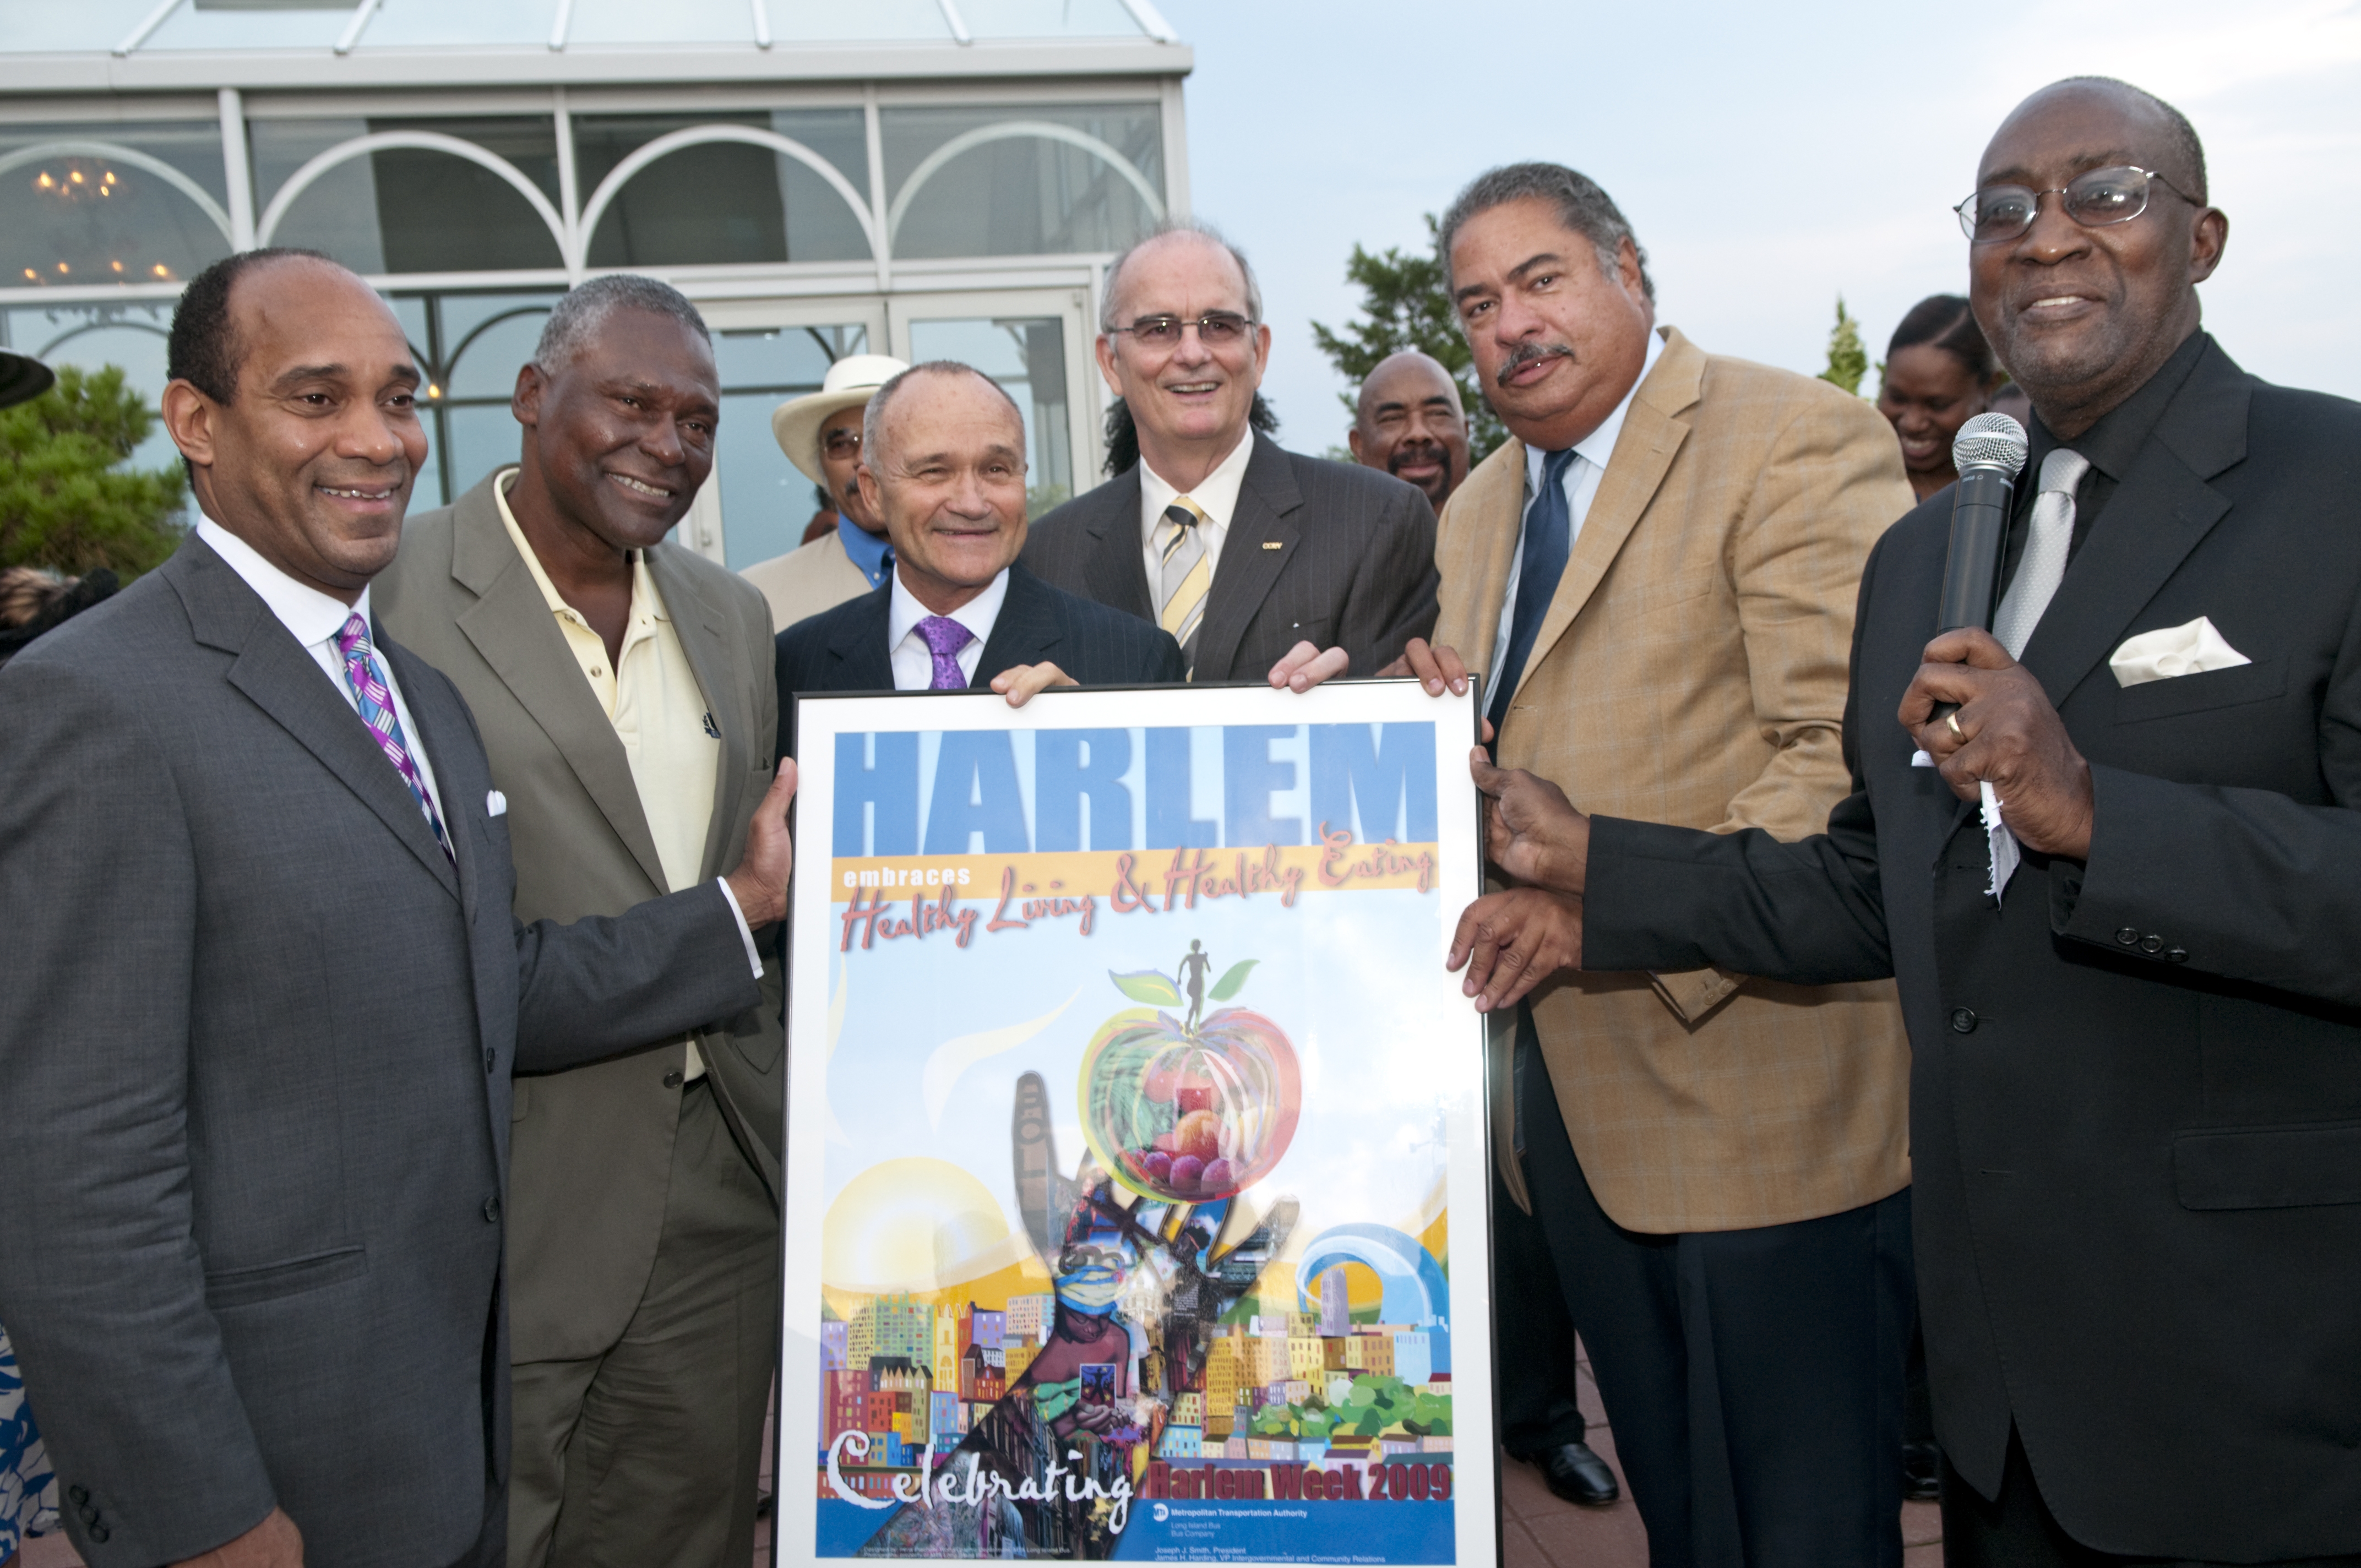 Left to right:Michael J. Garner, Chief Diversity Officer,  Metropolitan Transportation Authority (MTA); Assemblyman Keith L.T. Wright; Police Commissioner Raymond Kelly; President Williams; James Harding, Jr., VP,Vice President, MTA, and Lloyd A. Williams, Greater Harlem Chamber of Commerce President and CEO